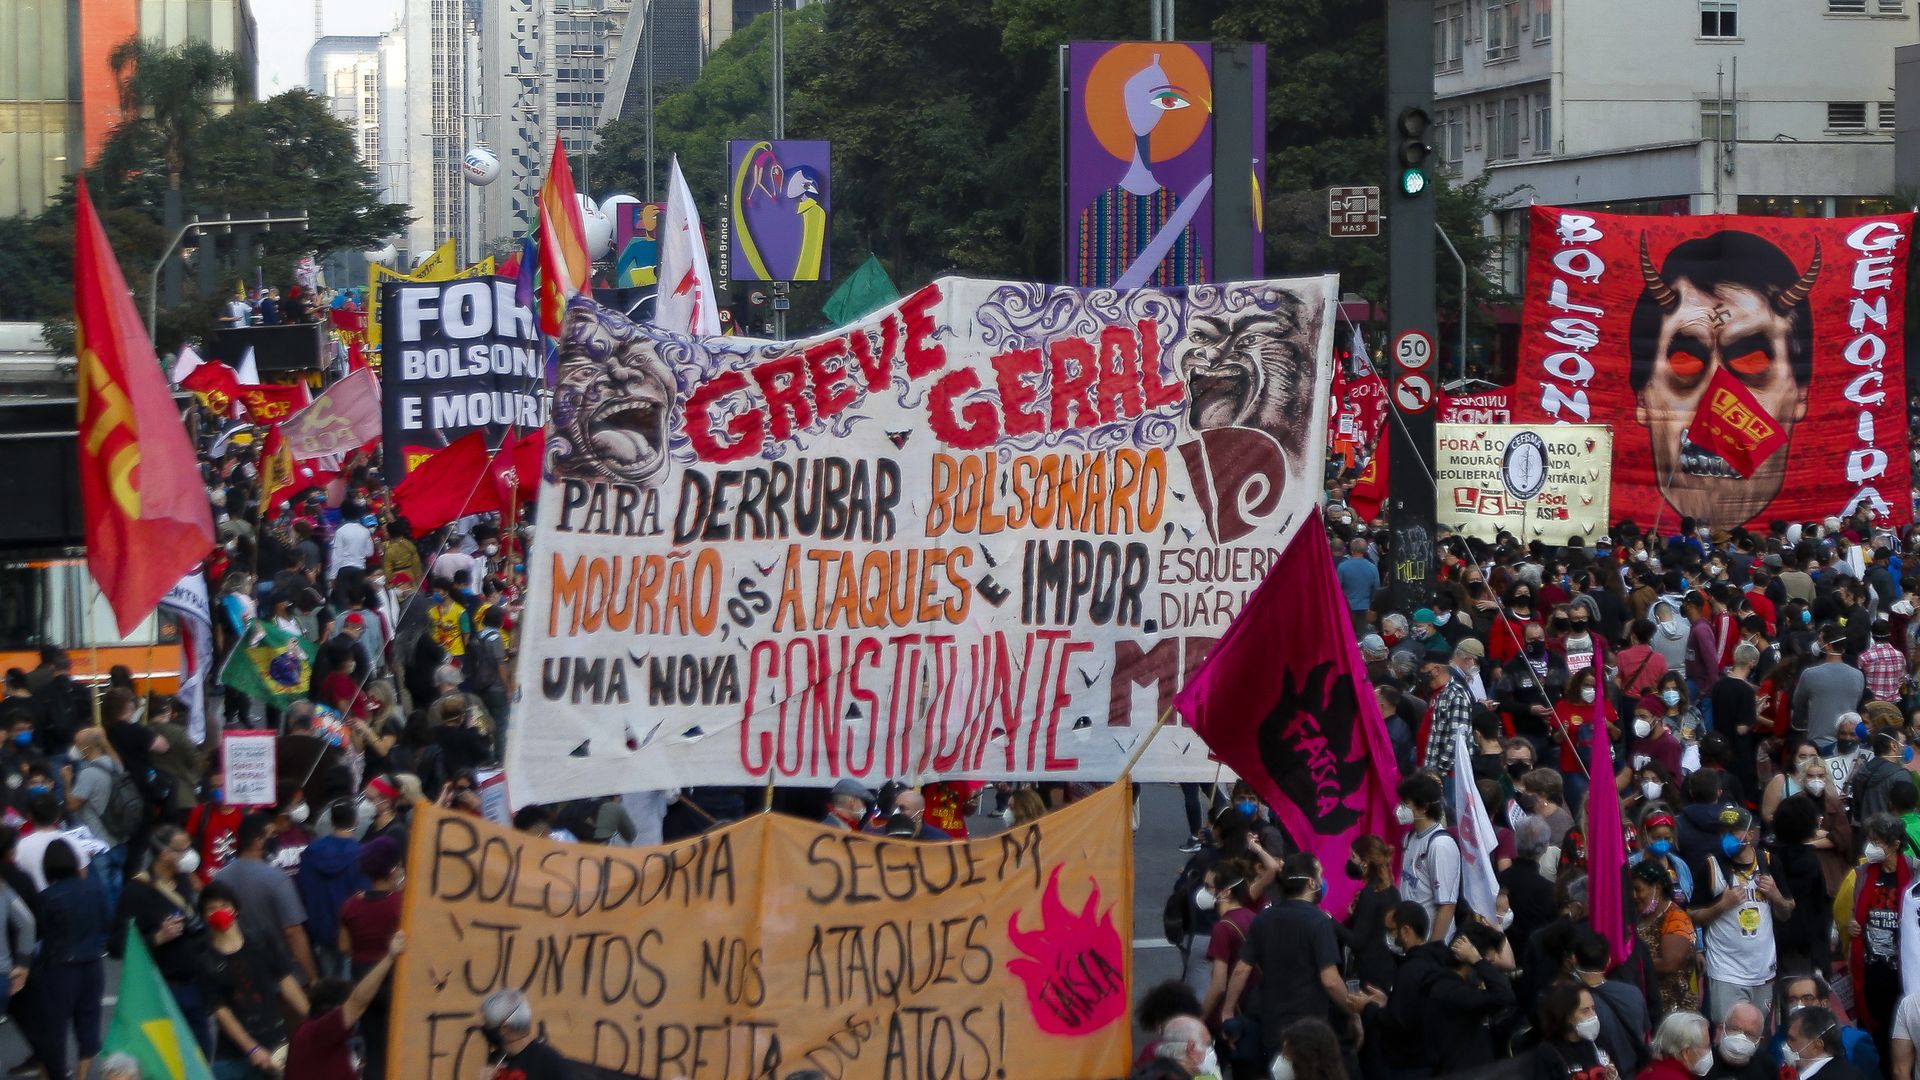 People take part in a demonstration against the Brazilian President Jair Bolsonaro's handling of the COVID-19 pandemic in Sao Paulo, Brazil, on July 3, 2021. 